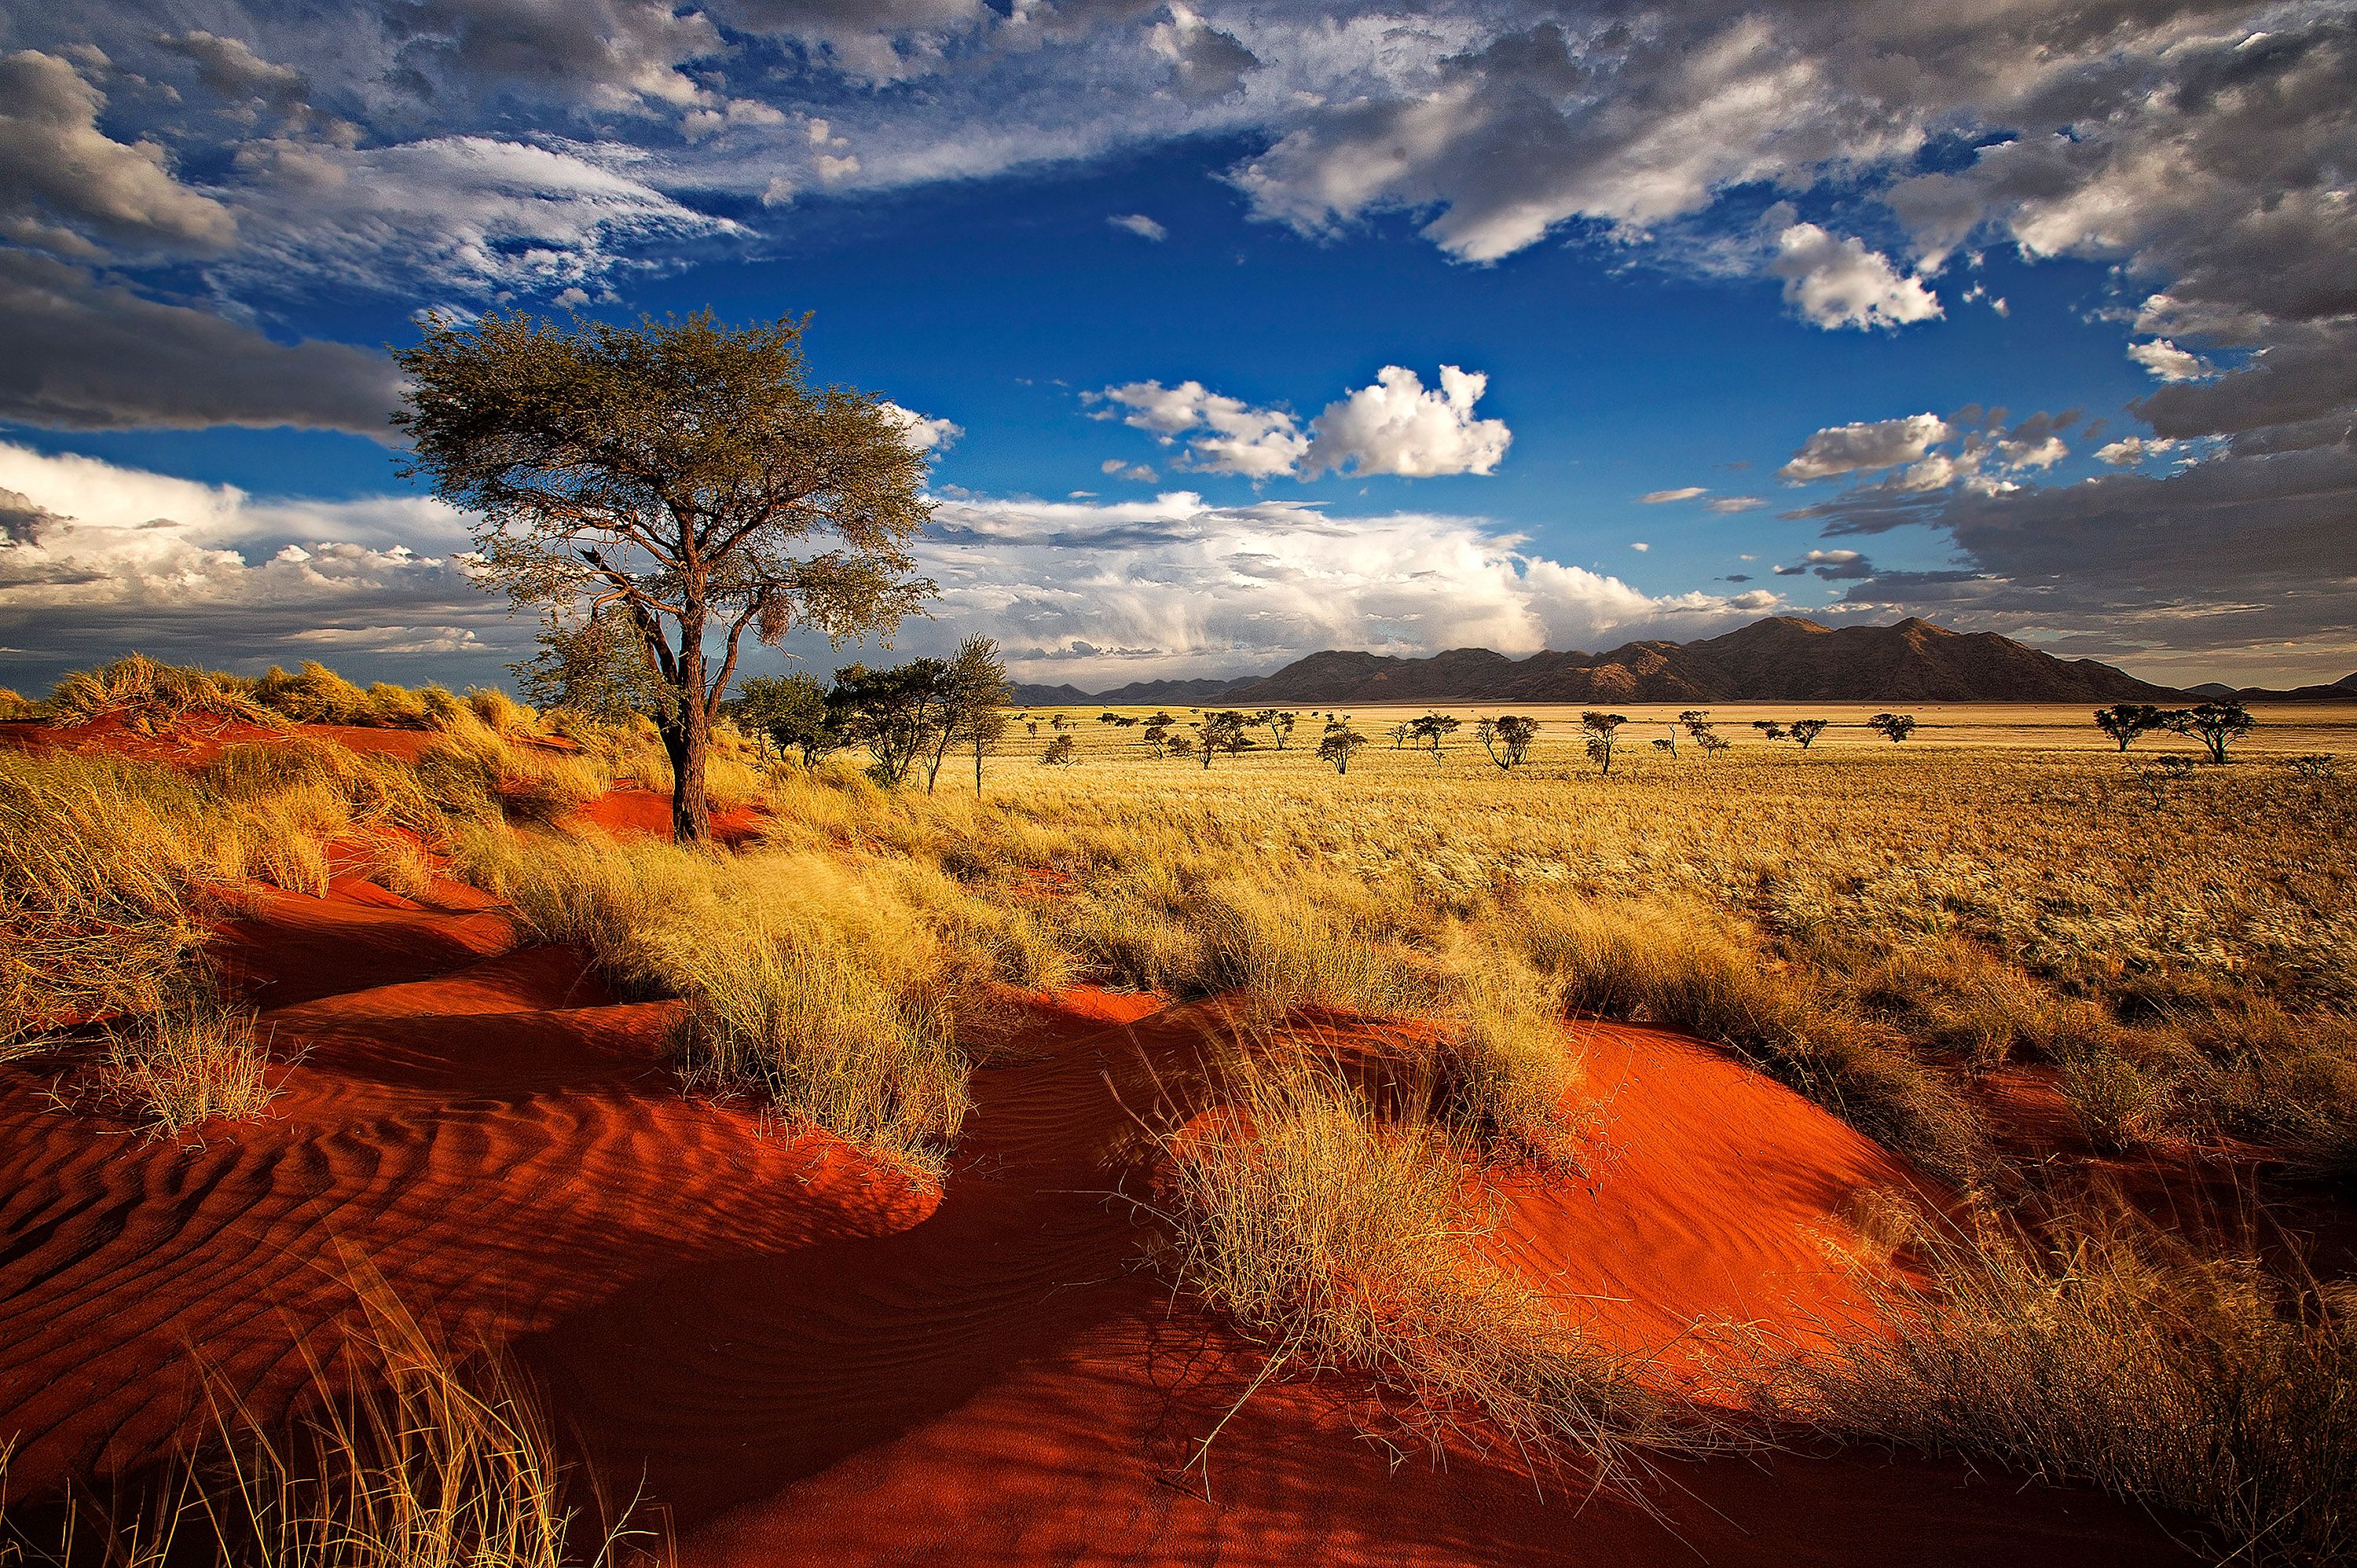 3000x1996px Widescreen wallpaper of Namibia 9